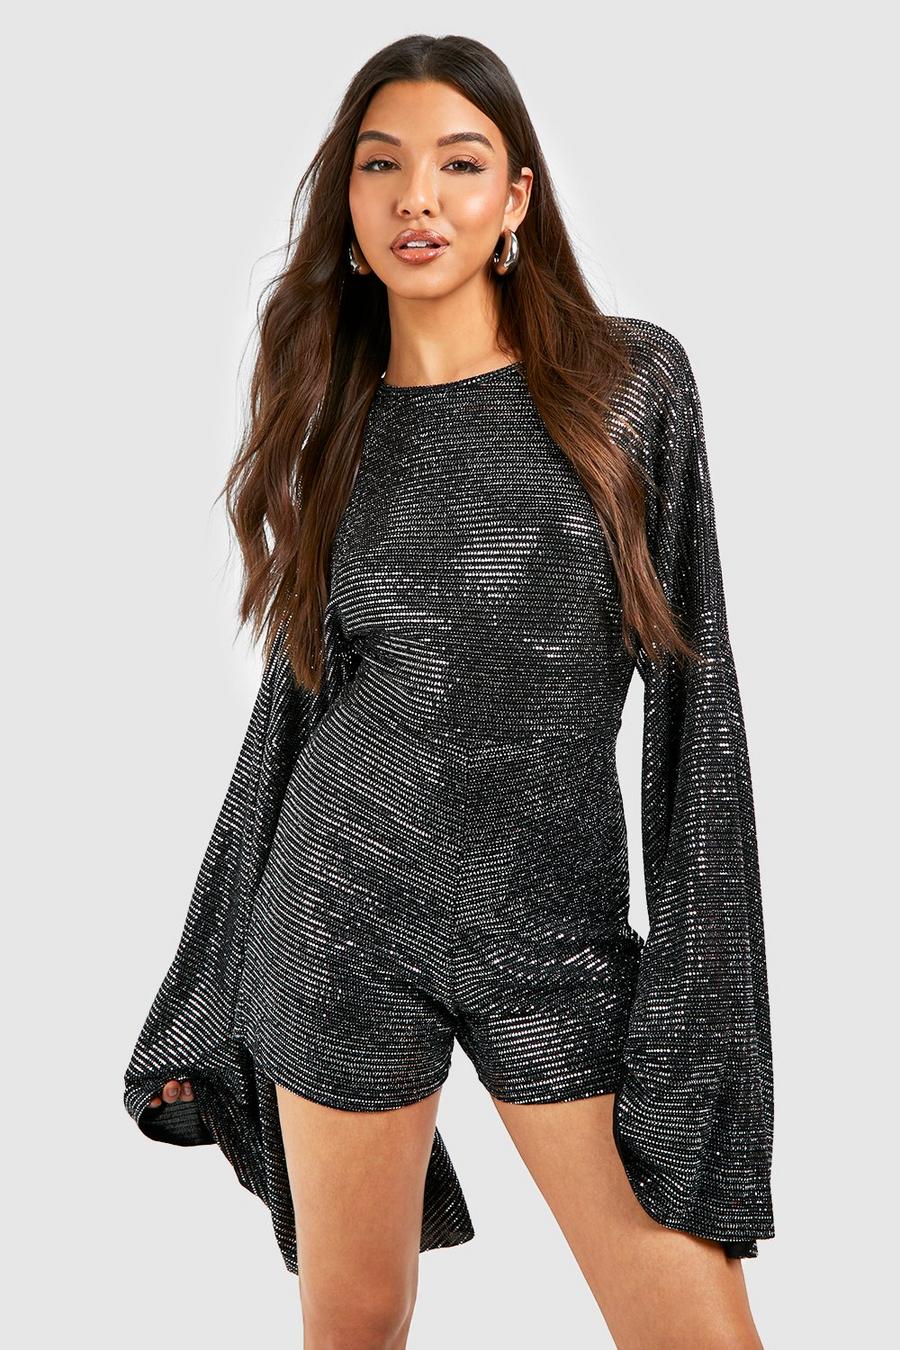 Silver Sequin Extreme Flare Sleeve Playsuit